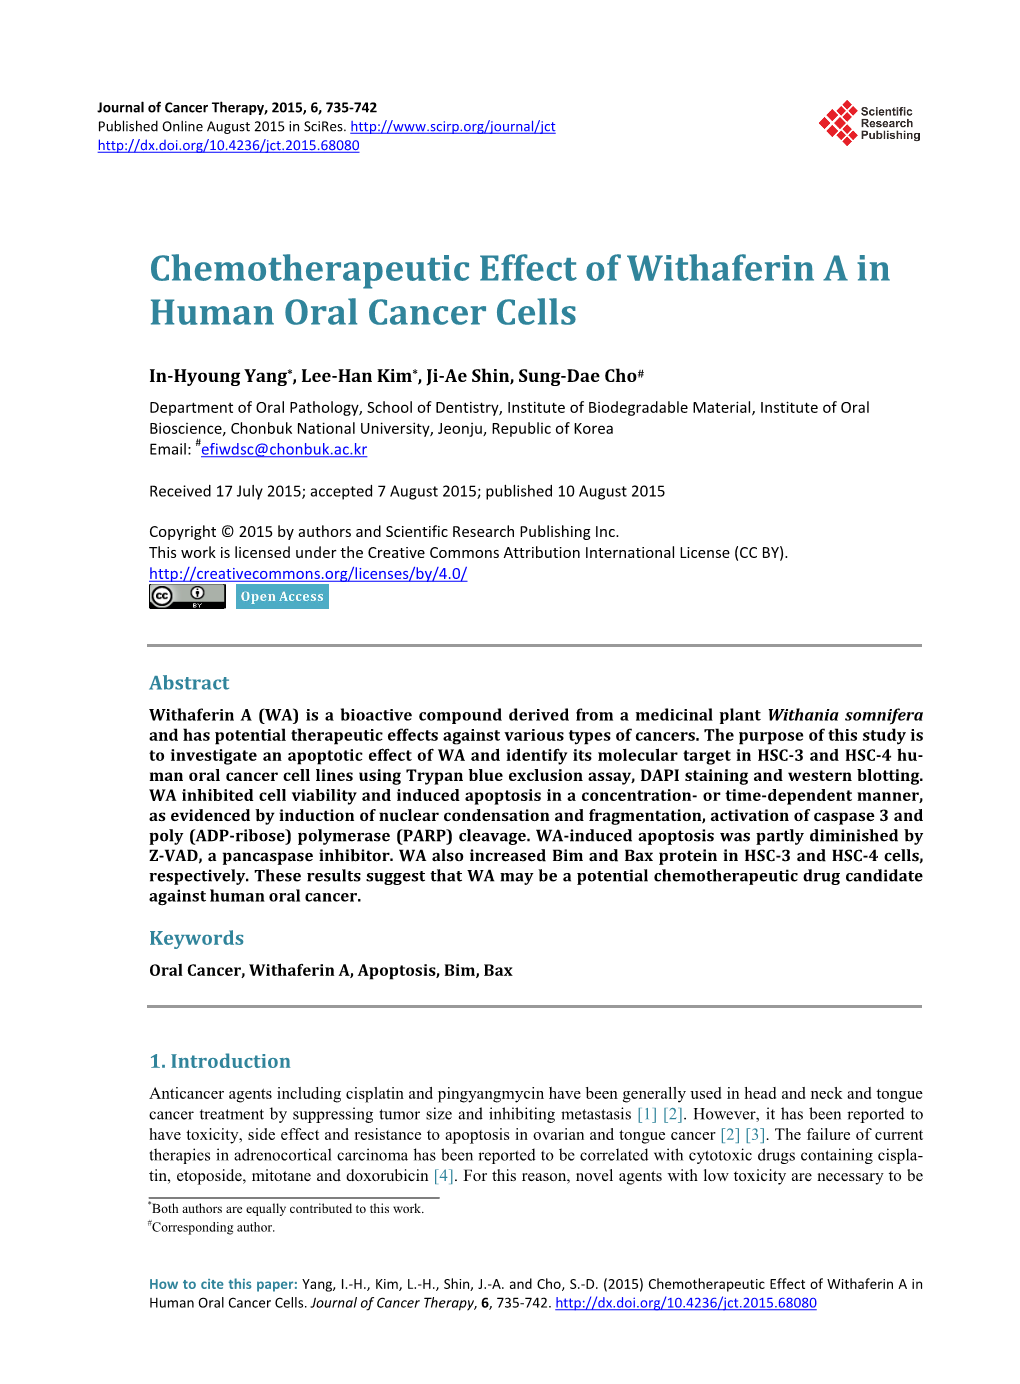 Chemotherapeutic Effect of Withaferin a in Human Oral Cancer Cells